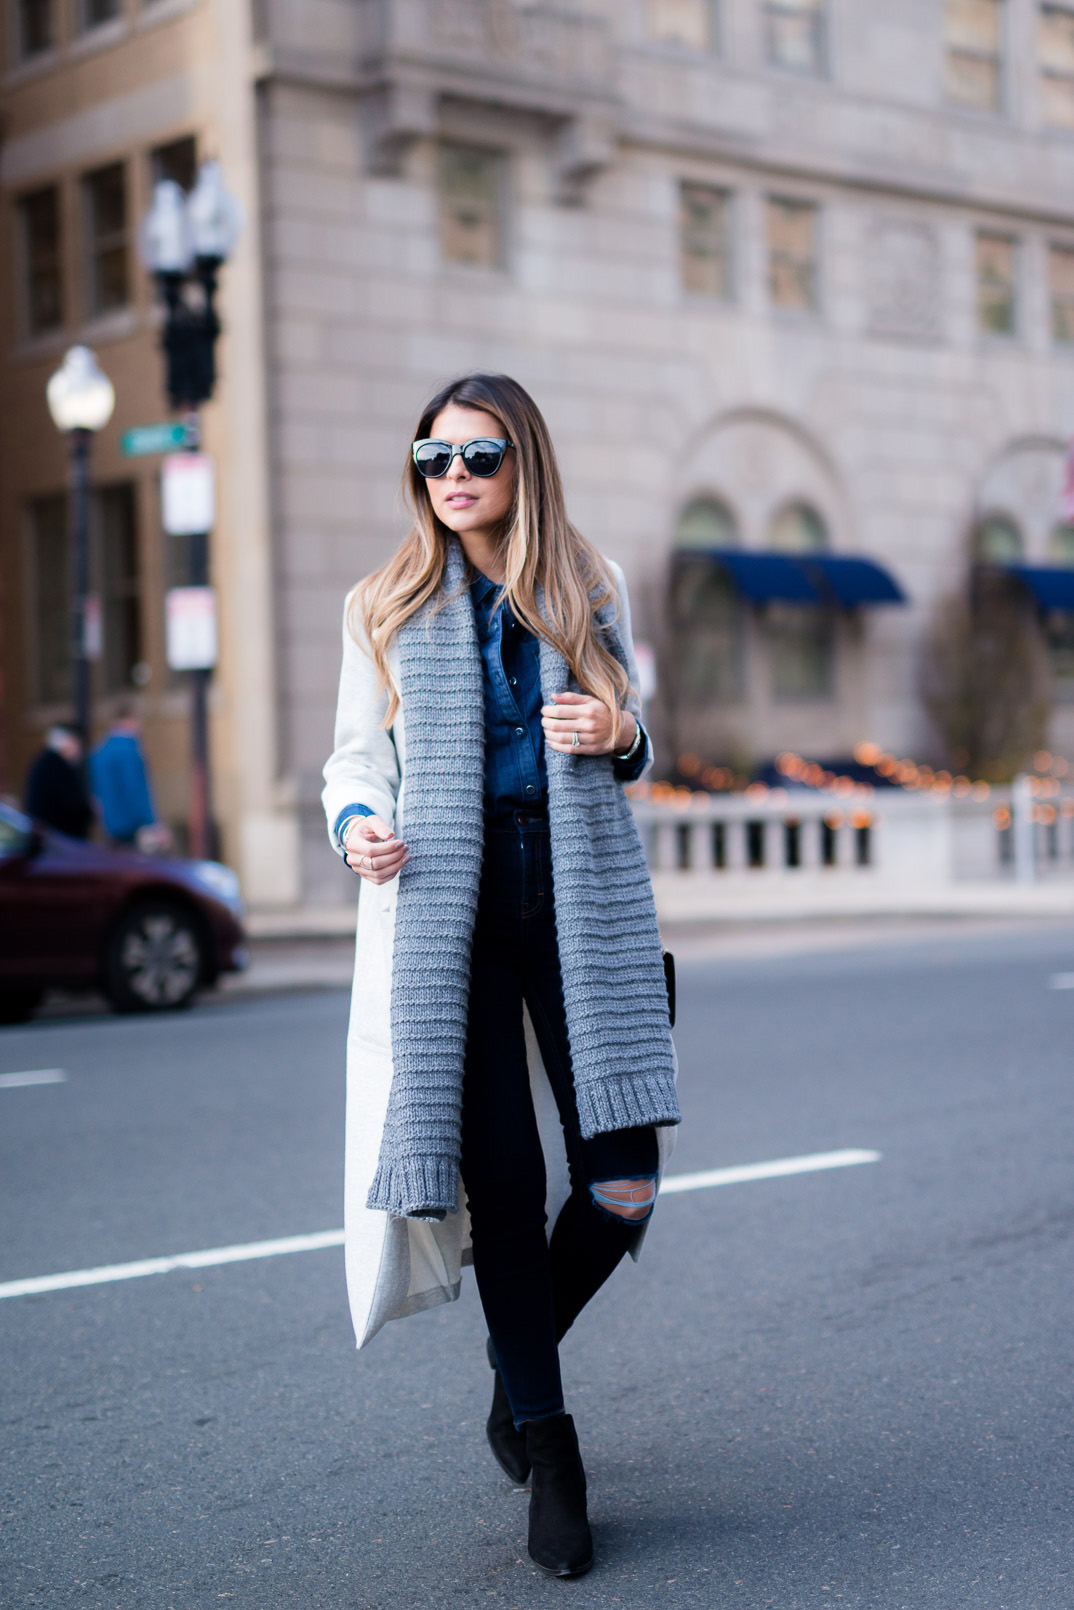 5 Knit Pieces You Need To Add To Your Fall Wardrobe - fashionsy.com